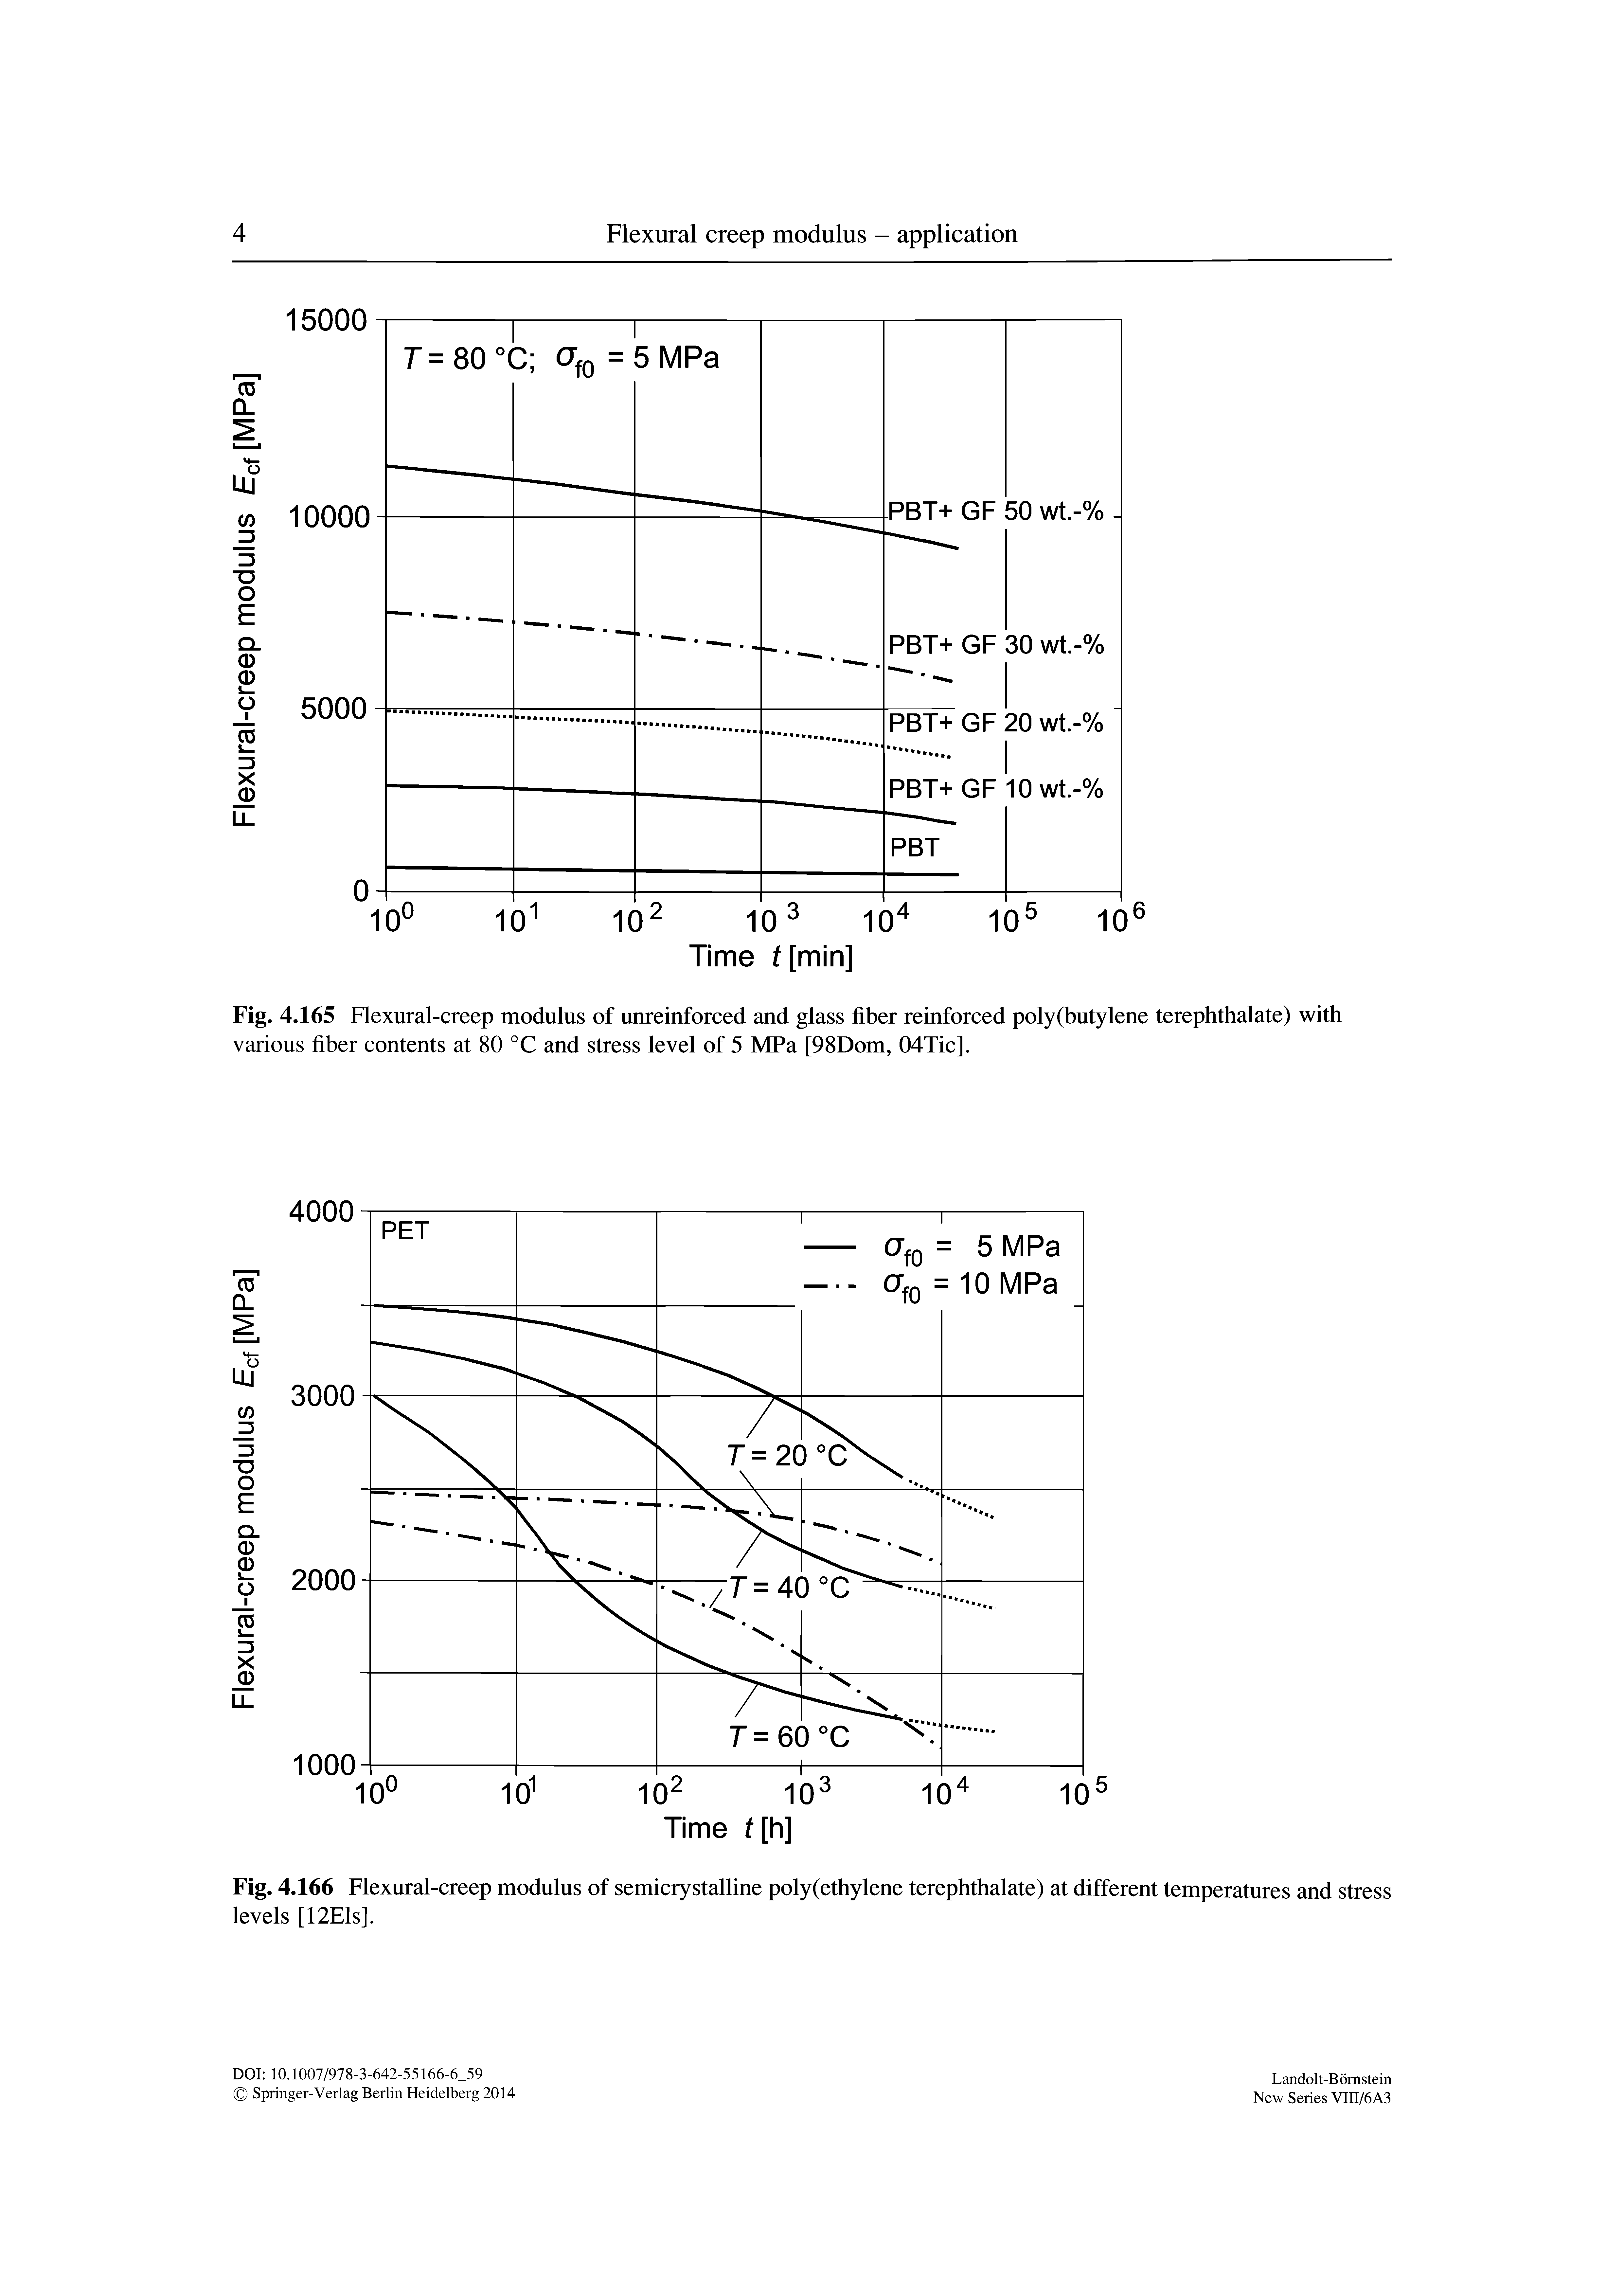 Fig. 4.166 Flexural-creep modulus of semicrystalline poly(ethylene terephthalate) at different temperatures and stress levels [12Els].